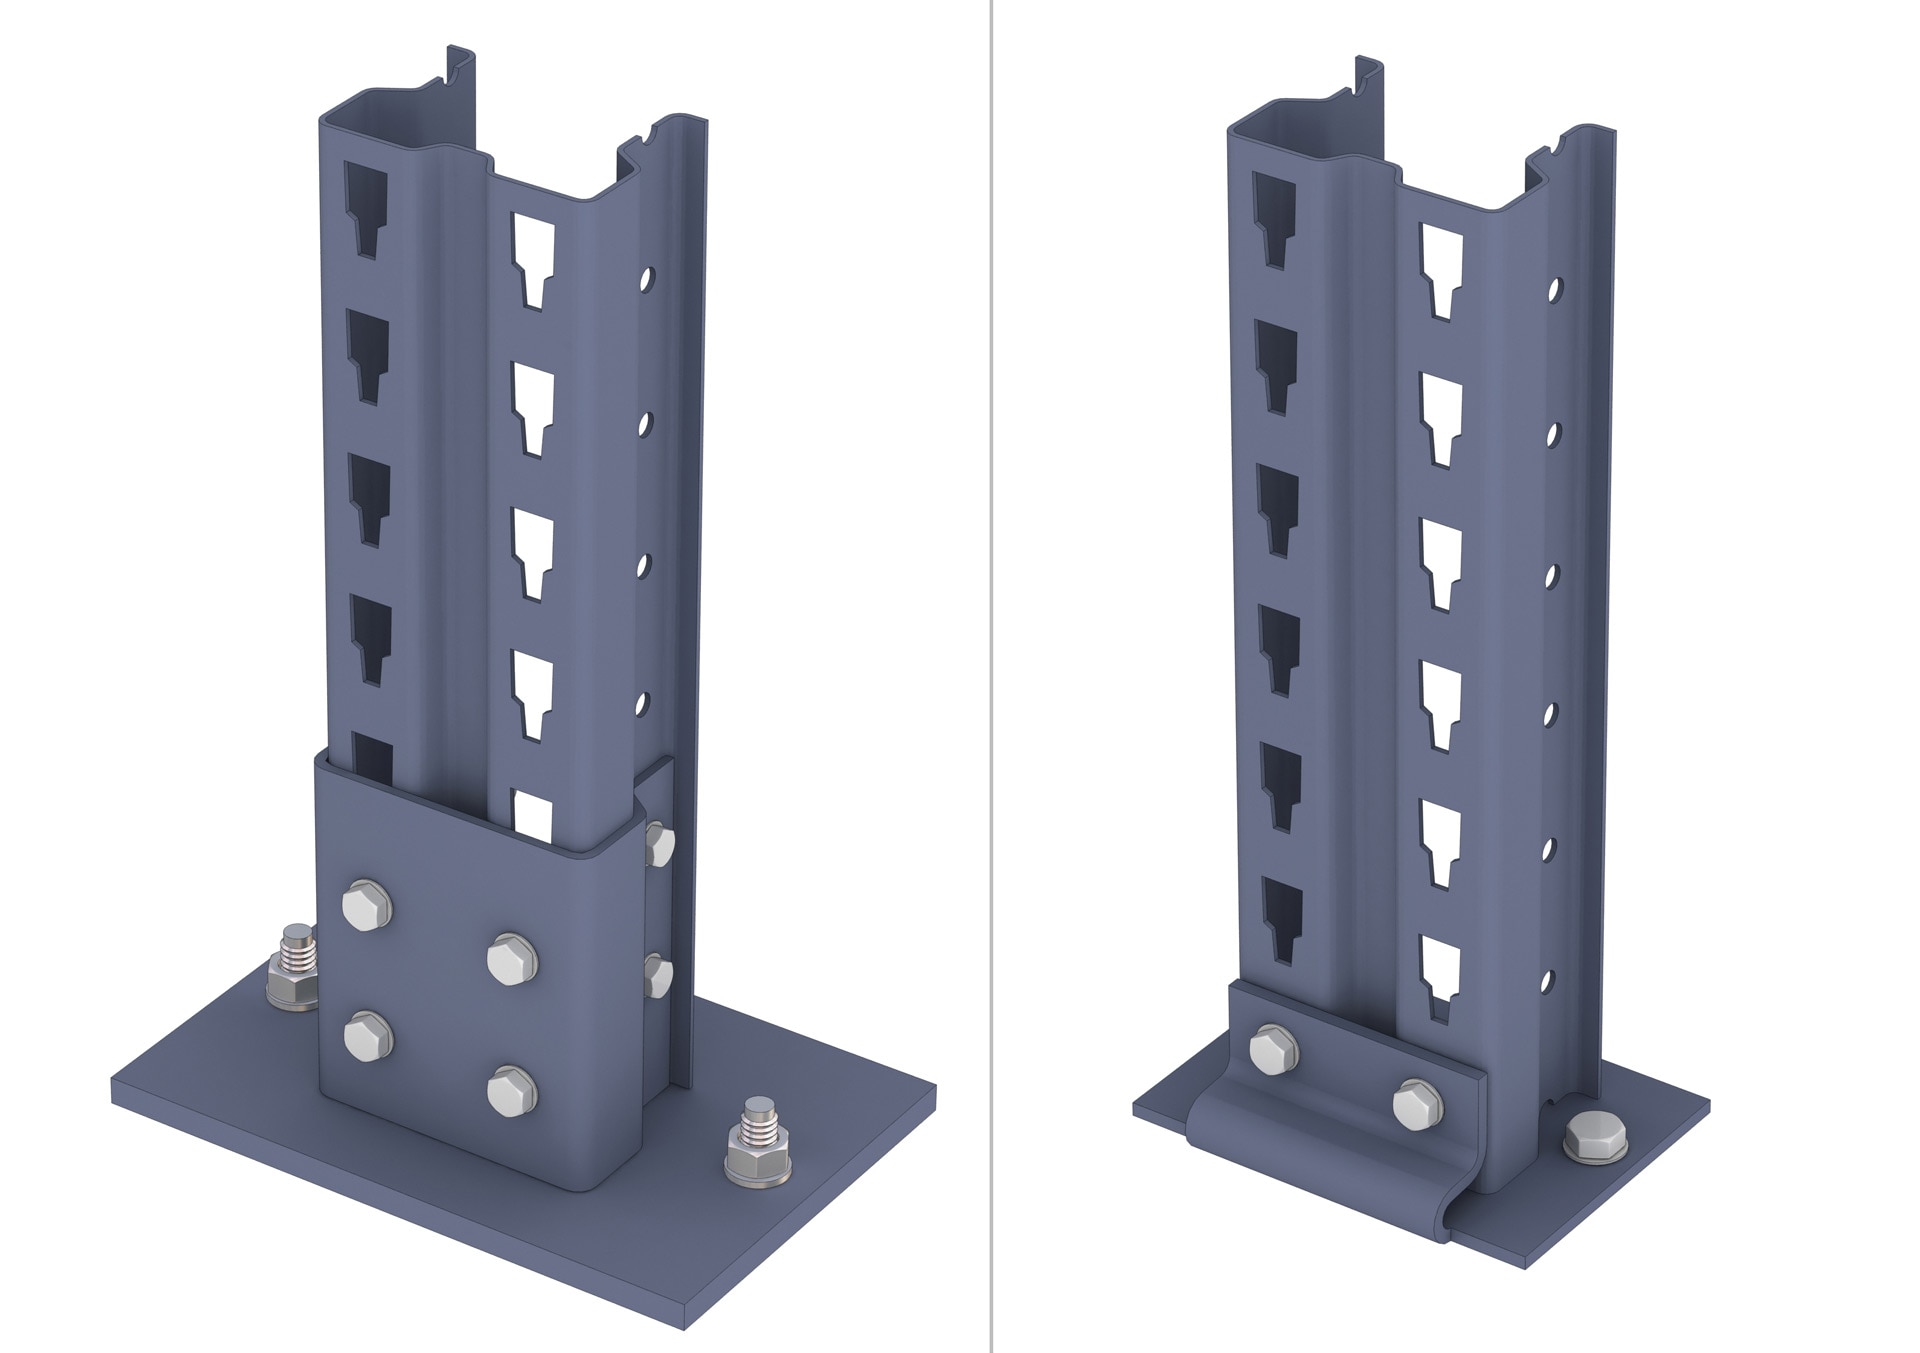 Upright footplates of the racks have side protectors to avoid damage to the structure